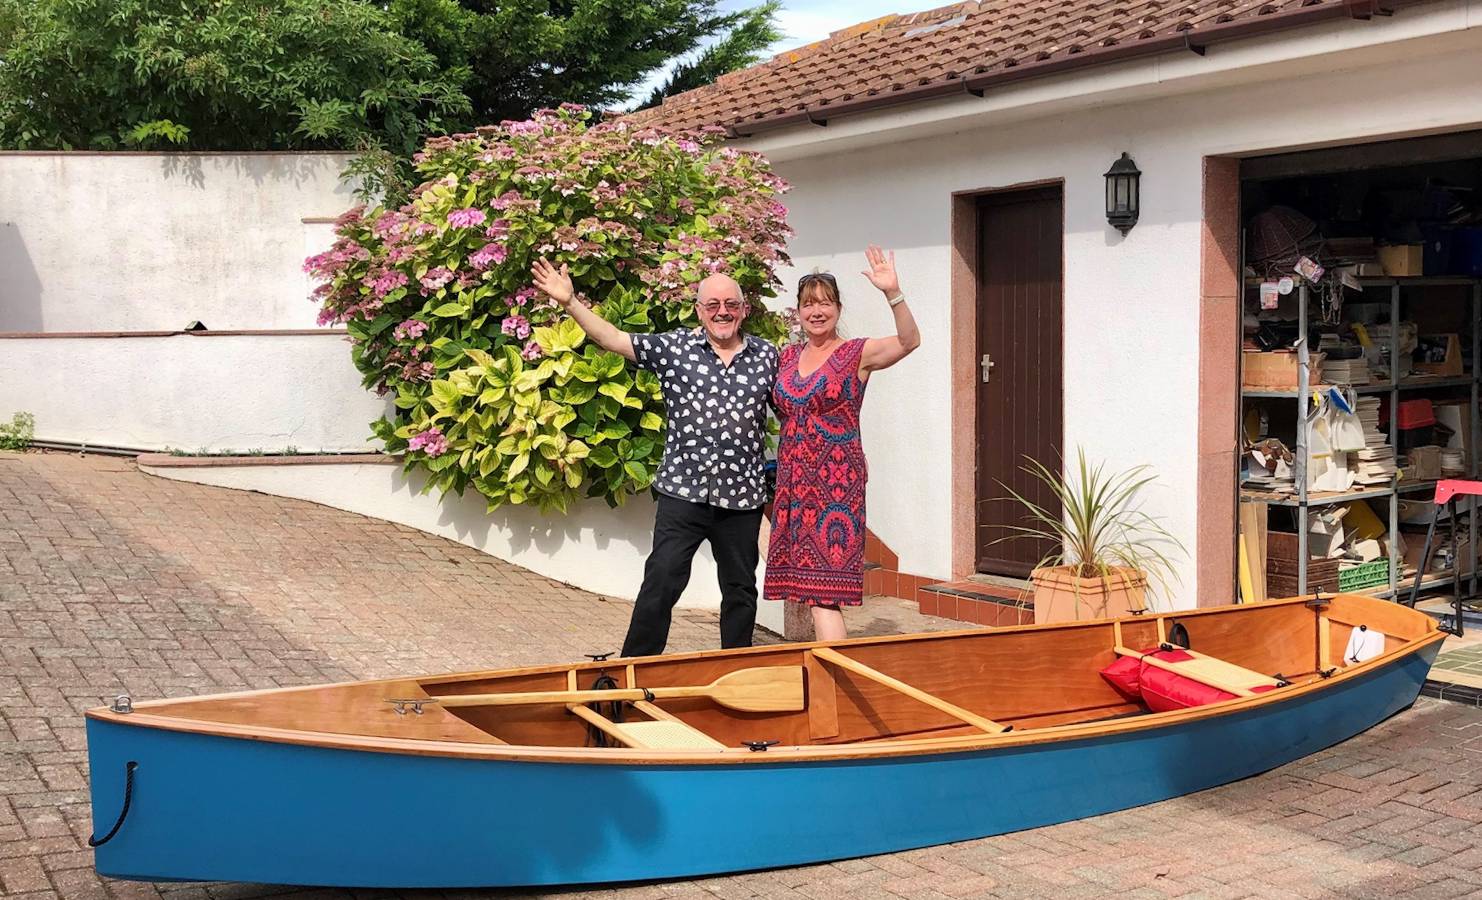 A home-built electric motor canoe - the Quick Canoe Electric